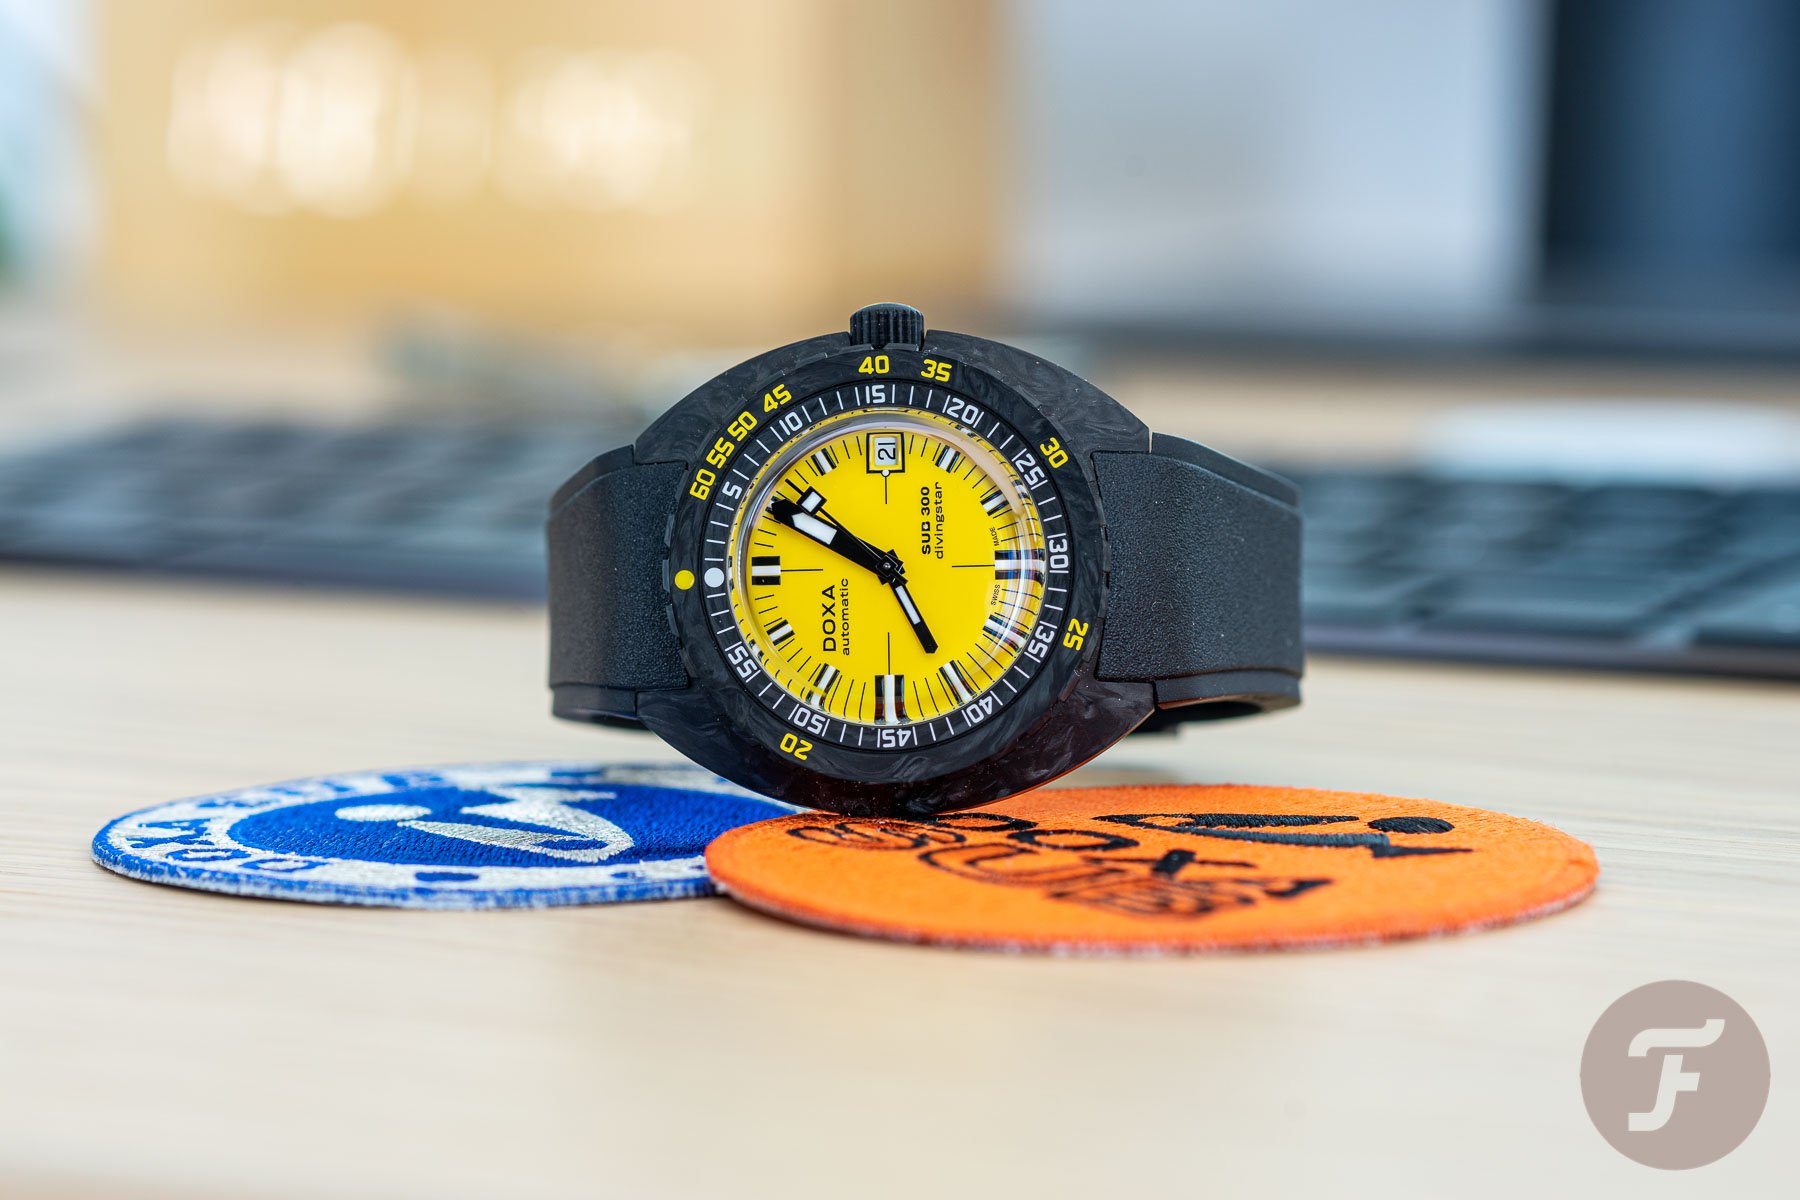 Black and yellow unusual suspects Doxa Sub 300 Carbon Divingstar